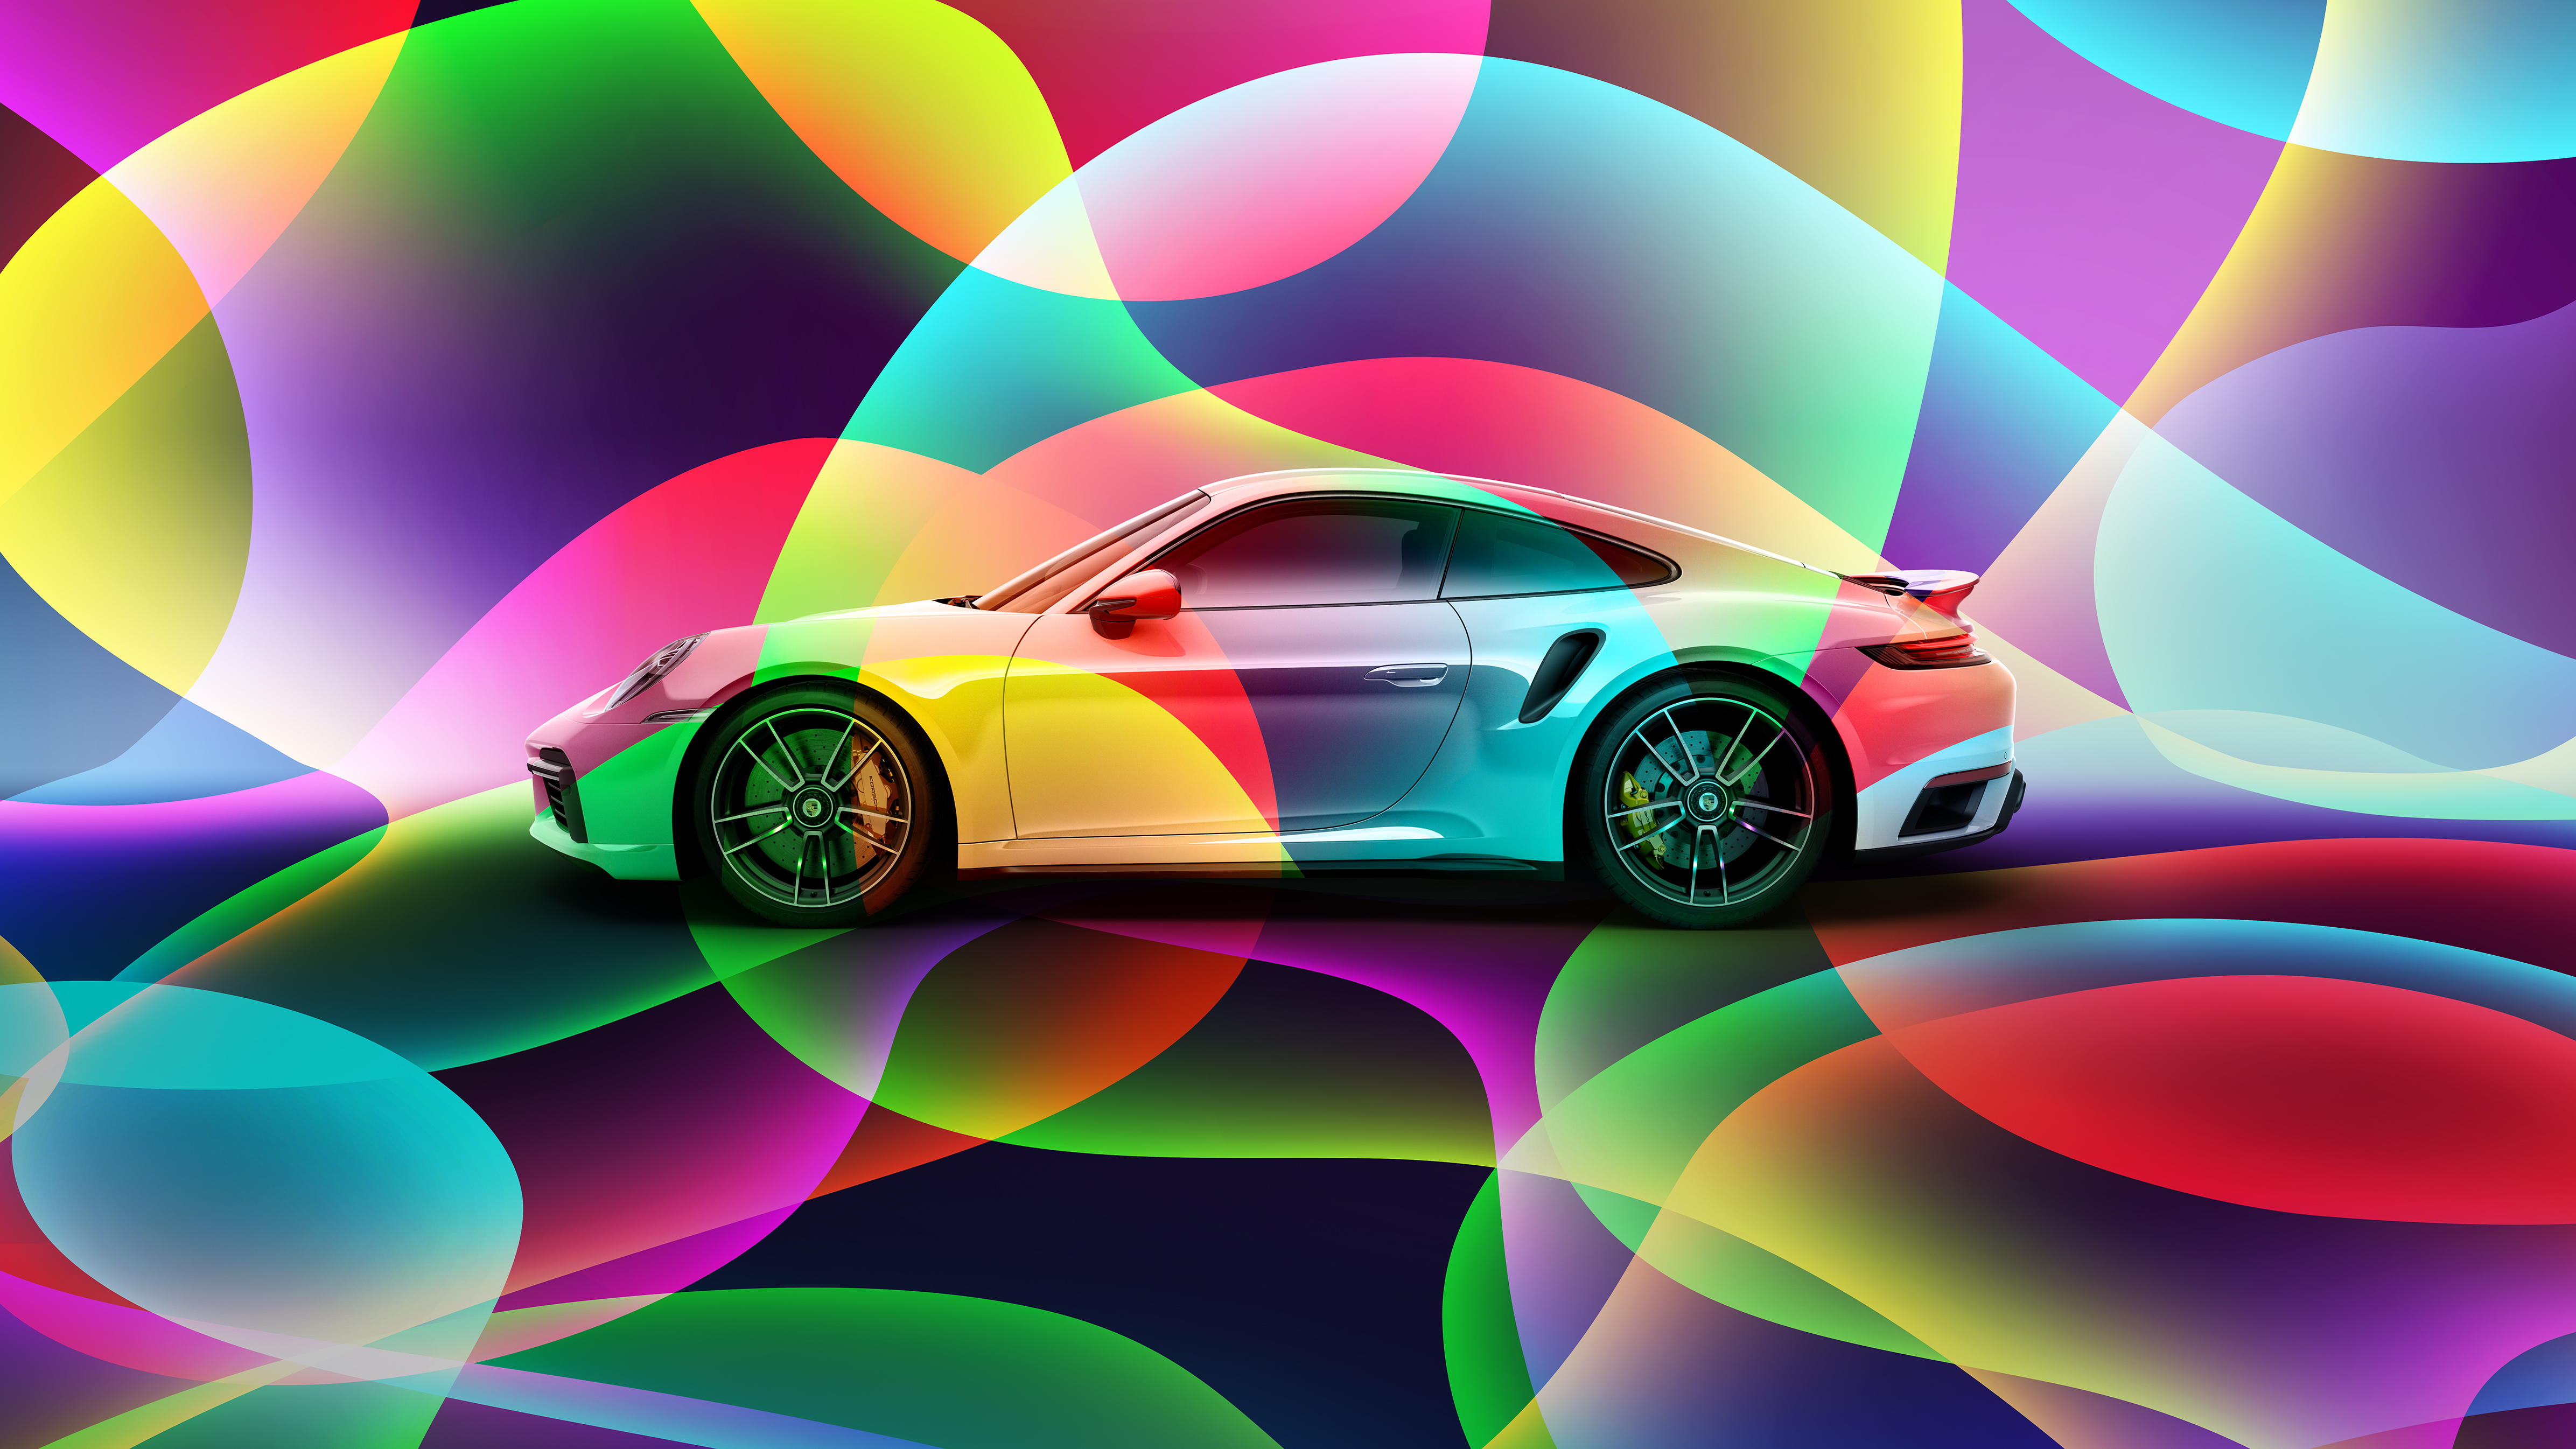 Side view of Porsche 911 with psychedelic, colourful pattern